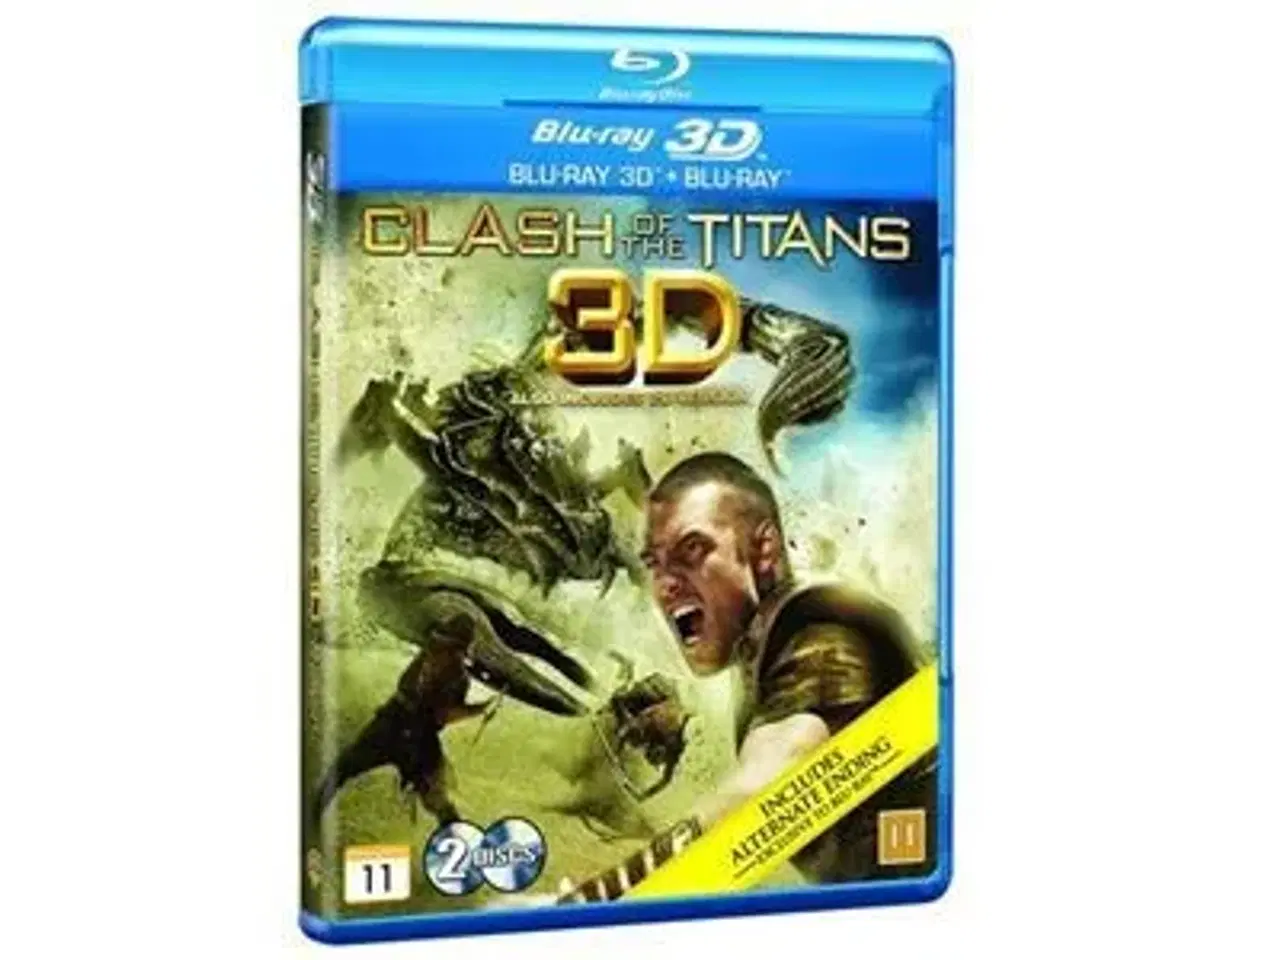 Billede 1 - Clash of the Titans - 3D Blu-ray